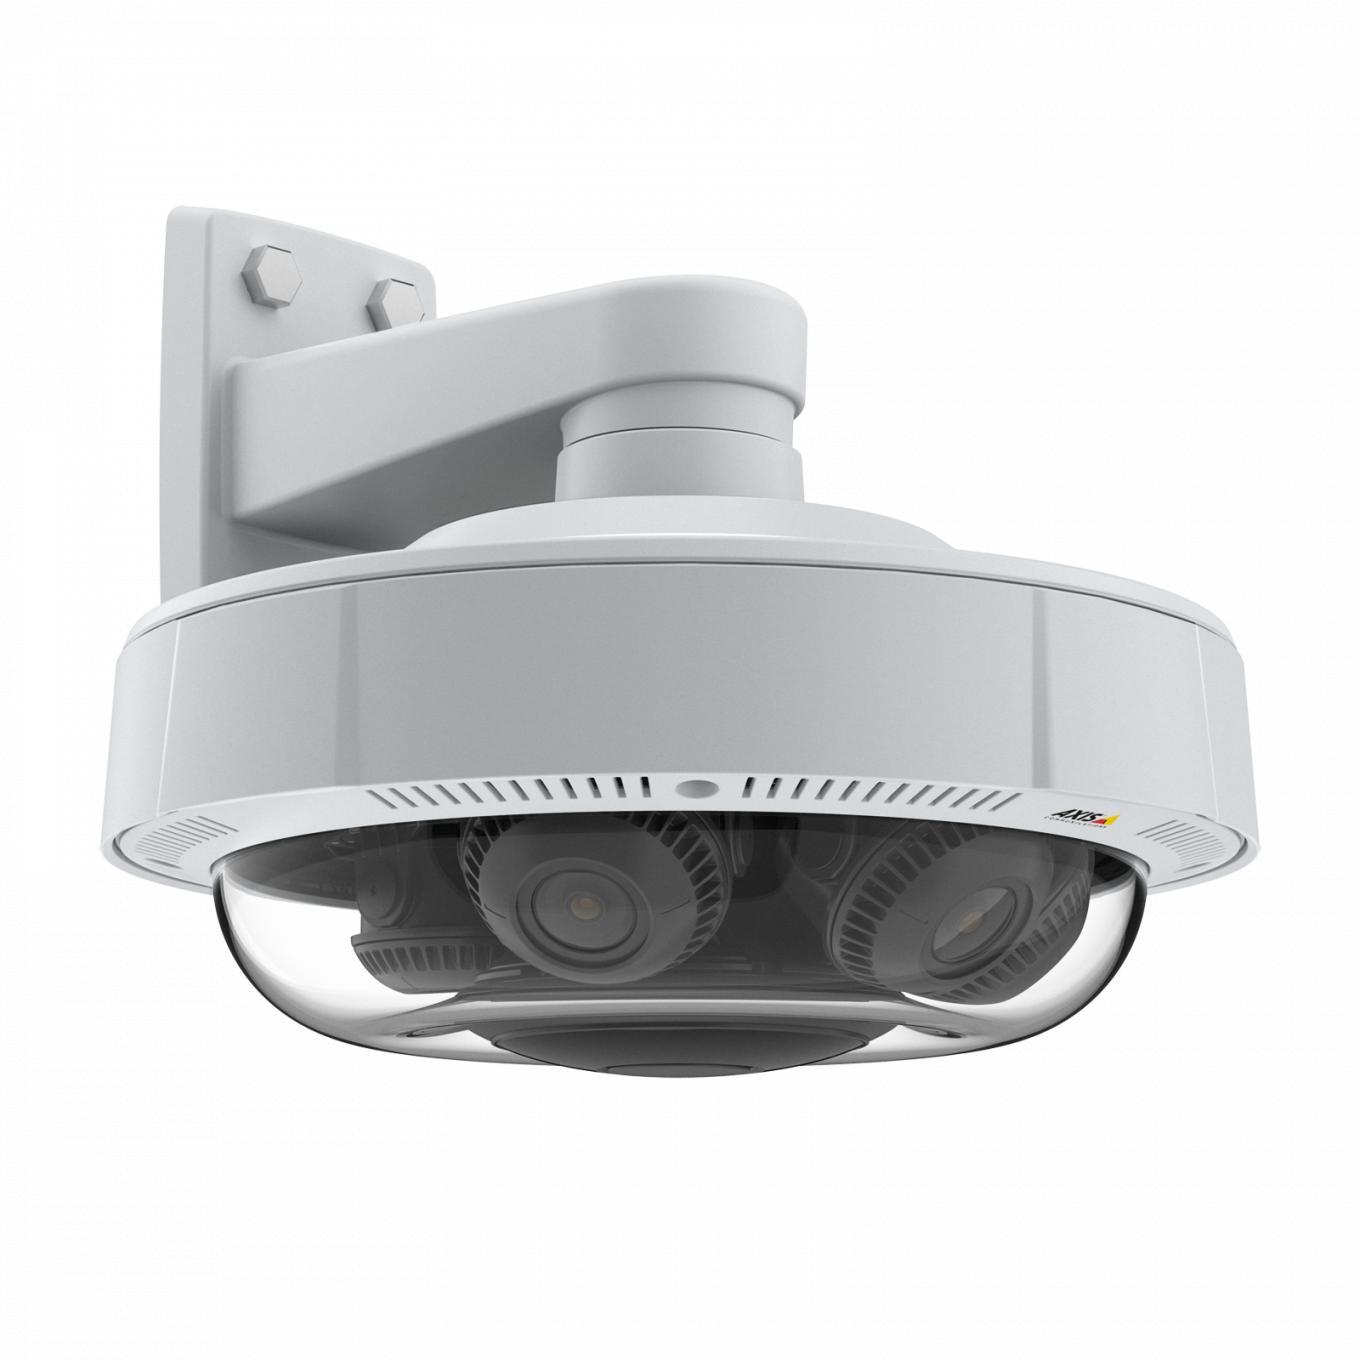 AXIS P3719-PLE is mounted to a wall and viewed from its right angle.